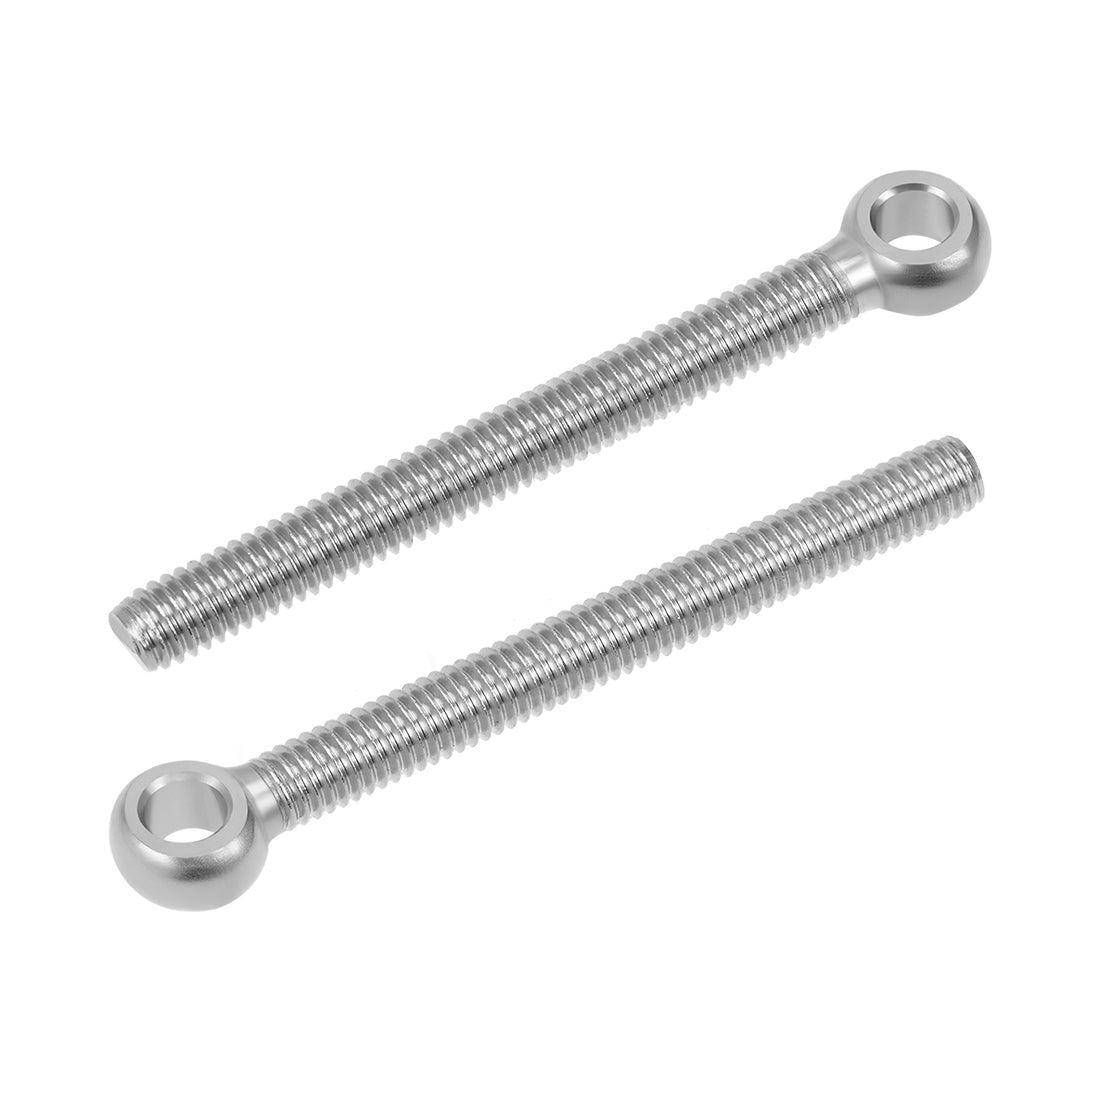 uxcell Uxcell M6 x 60mm Machinery Shoulder Swing Lifting Eye Bolt 304 Stainless Steel Metric Thread 2pcs